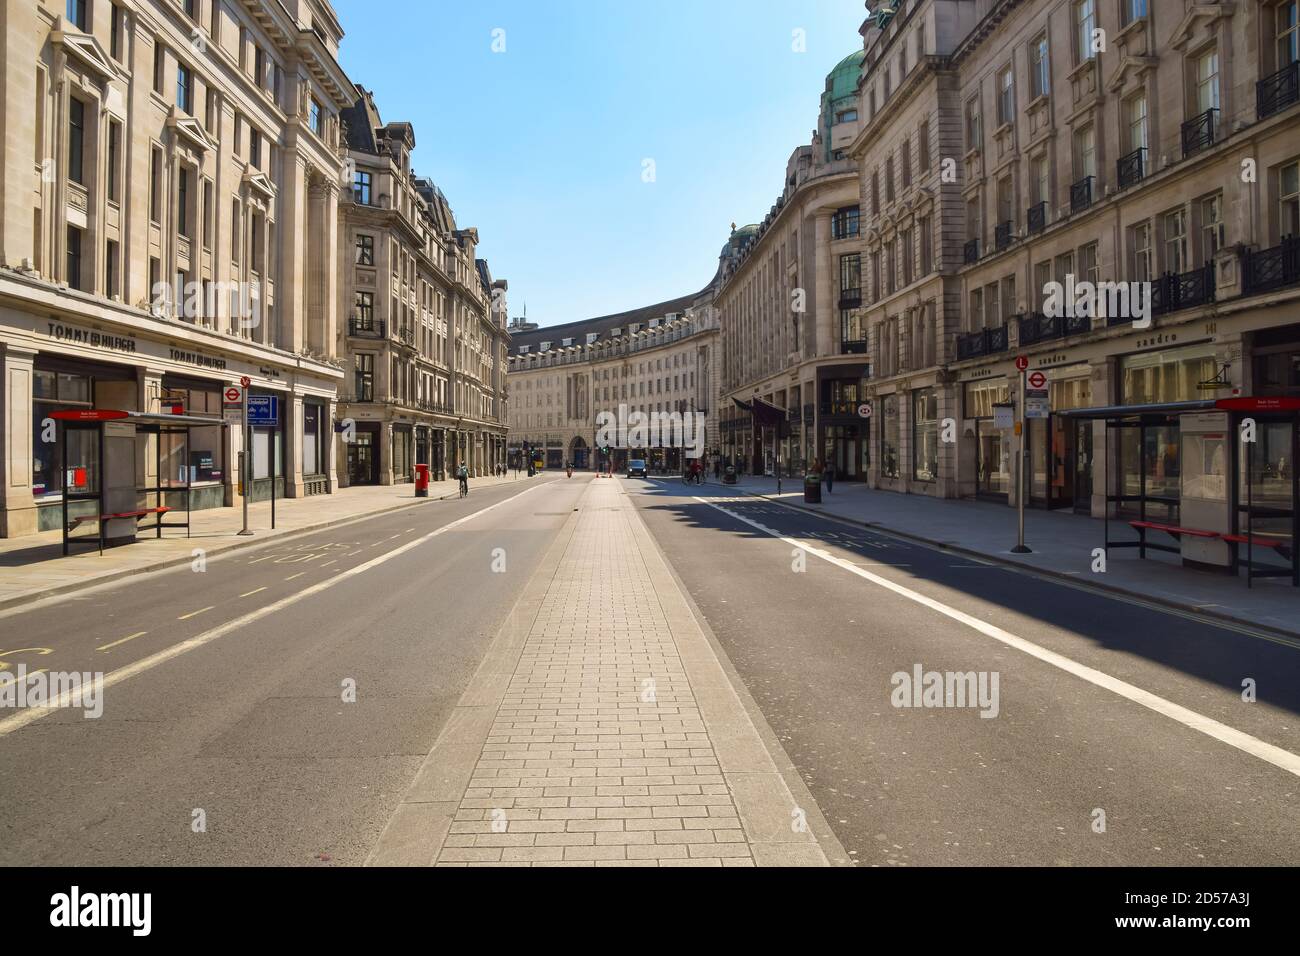 Empty Regent Street during 2020 lockdown. The usually bustling Central London resembled a ghost town as shops and businesses were closed during the coronavirus pandemic. Stock Photo